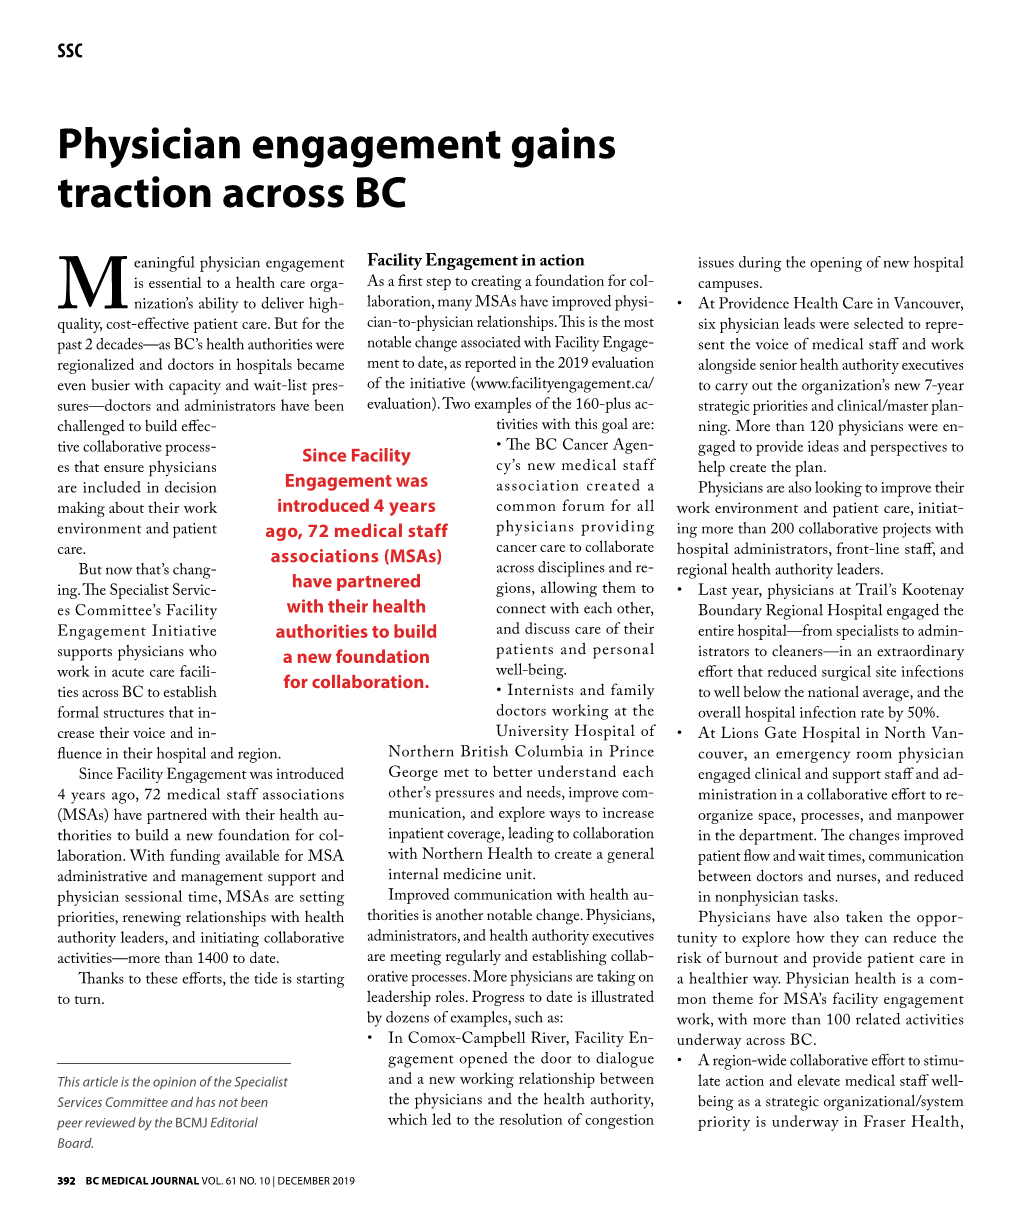 Physician Engagement Gains Traction Across BC